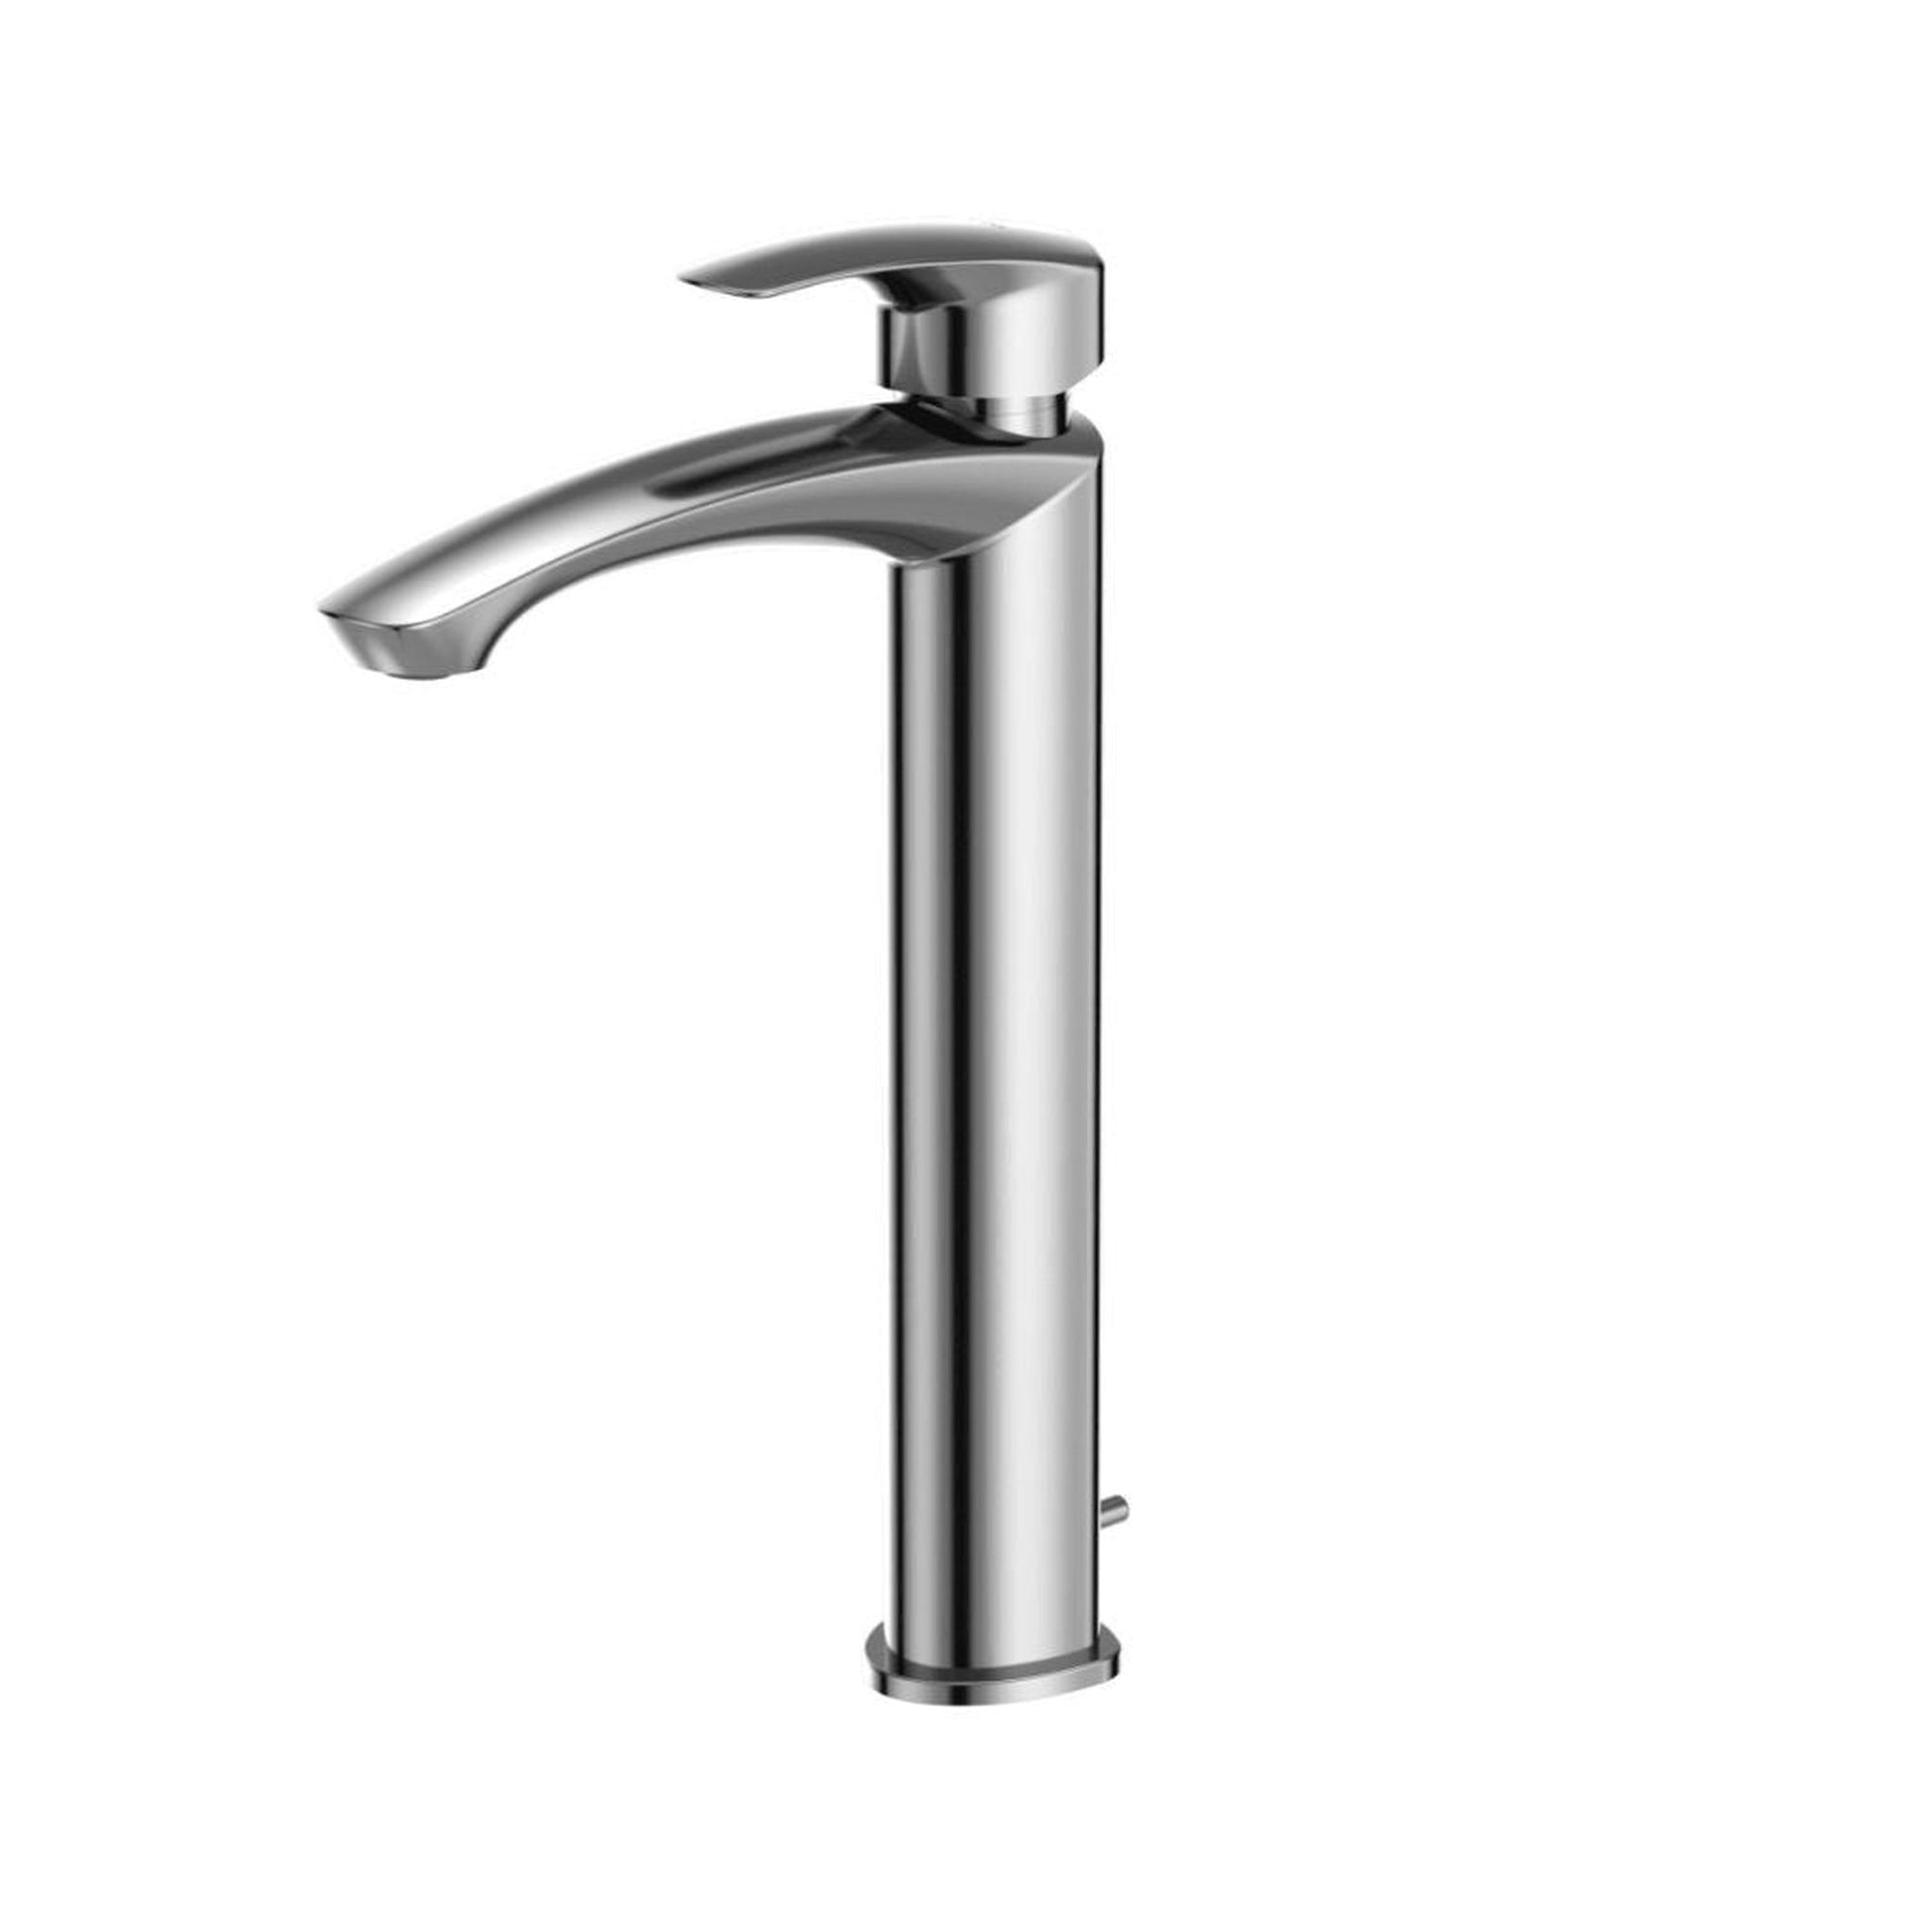 TOTO GM Polished Chrome 1.2 GPM Single-Handle Vessel Bathroom Sink Faucet With Comfort Glide